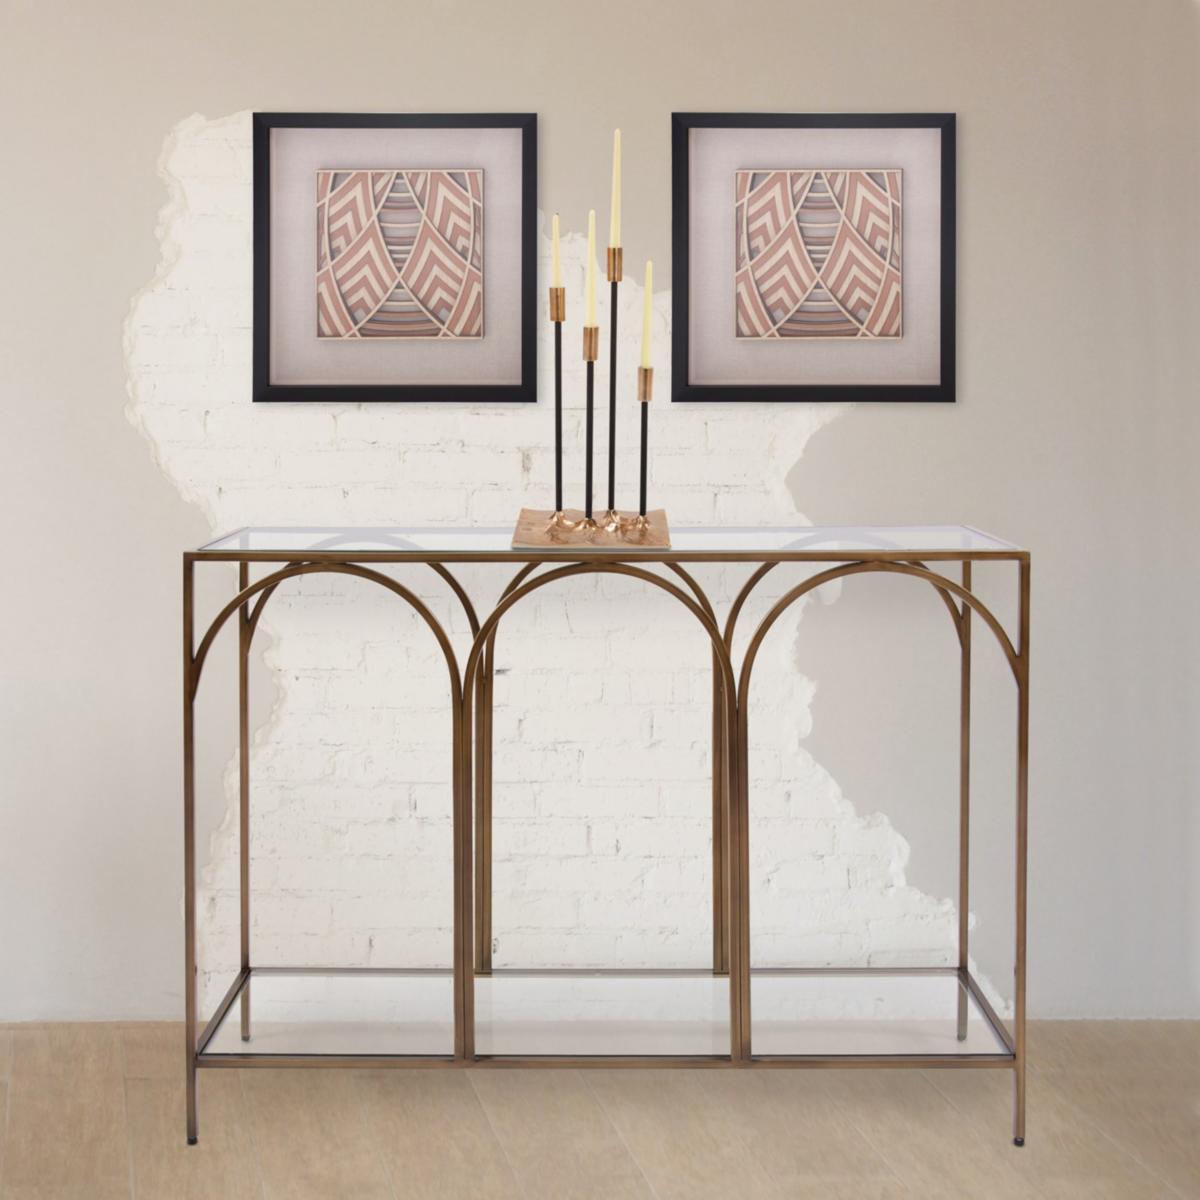 A console table with candles on it